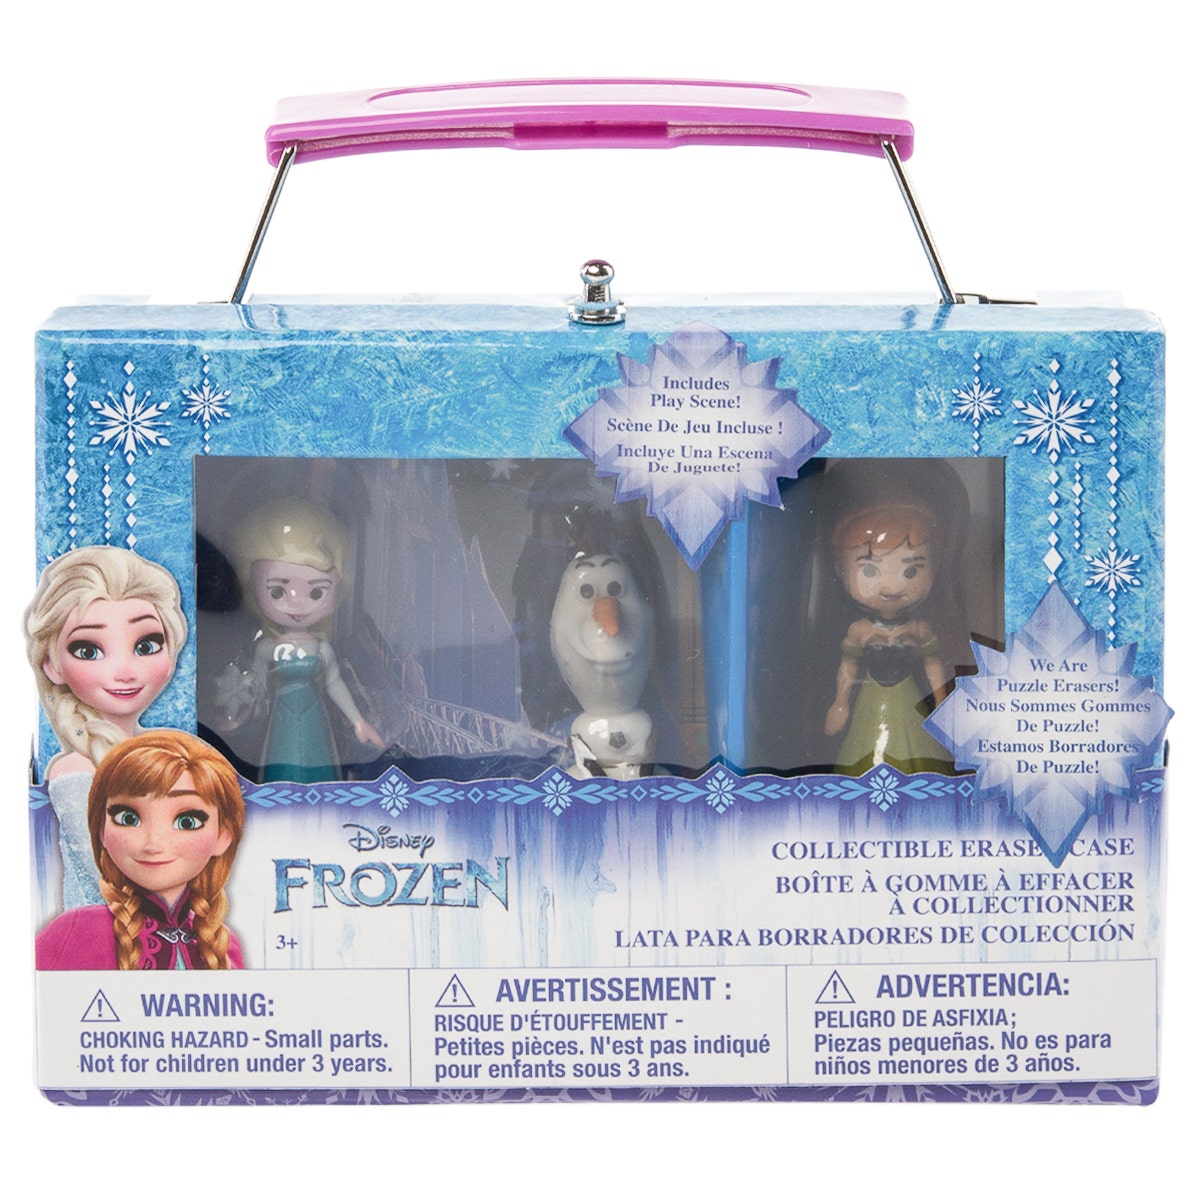 Disney Frozen Collectible Eraser Case With 3 Movie Characters & Play Scene